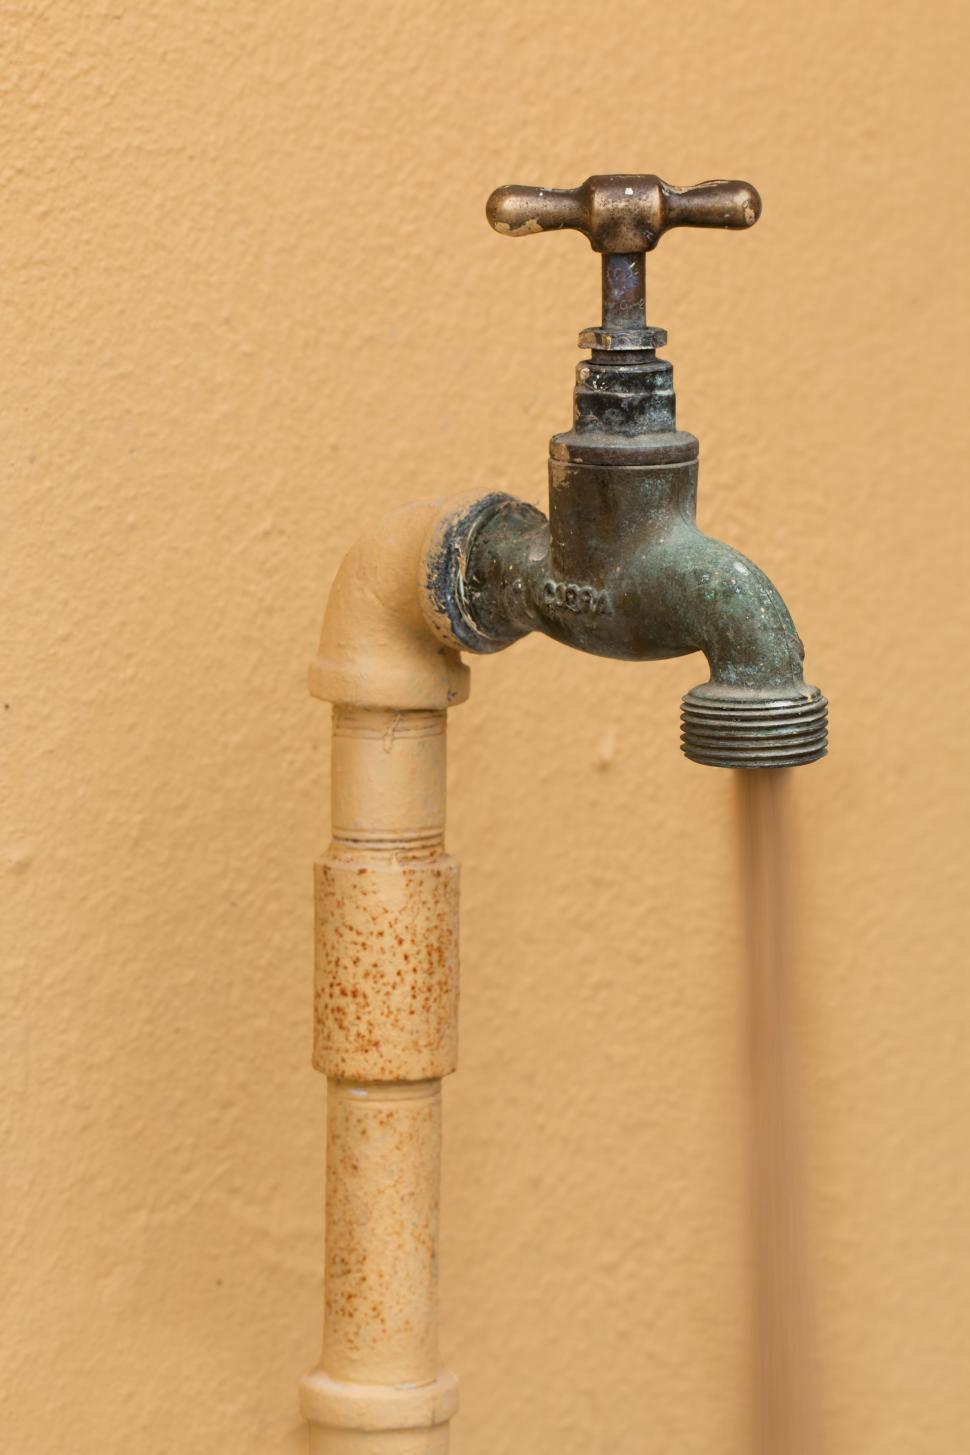 Free Image of faucet plumbing tap plumber pipe sanitary repairman water dry drought mistake fault repair service maintenance handyman fix technician tool fixing broken dirty water water purification polluted water pollution water quality defect failure global warming 